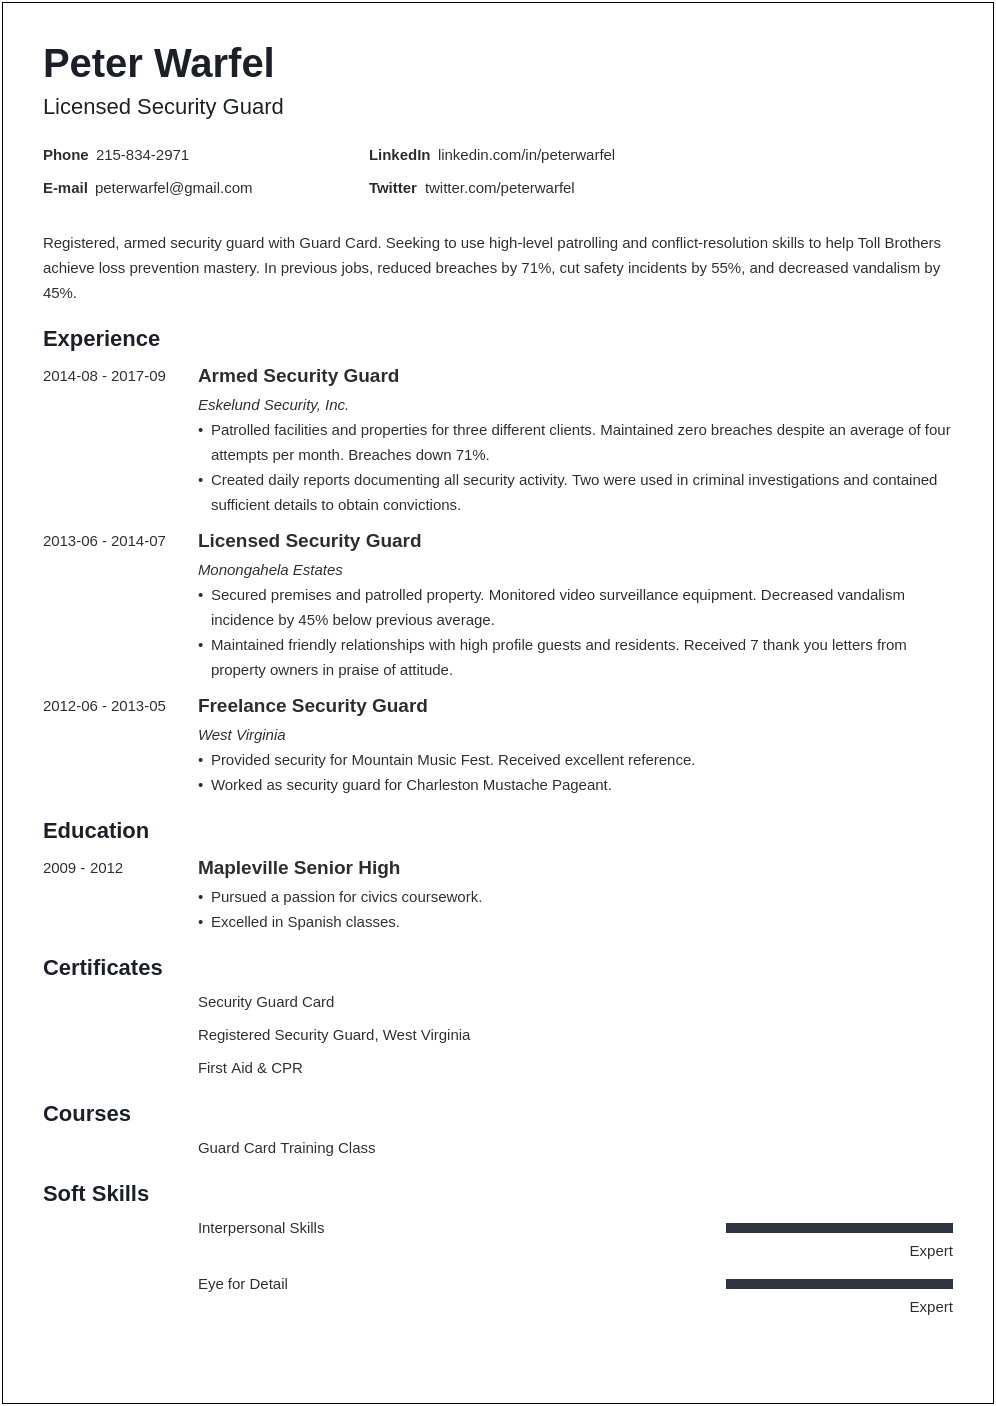 Resume For Security Guard Job With No Experience